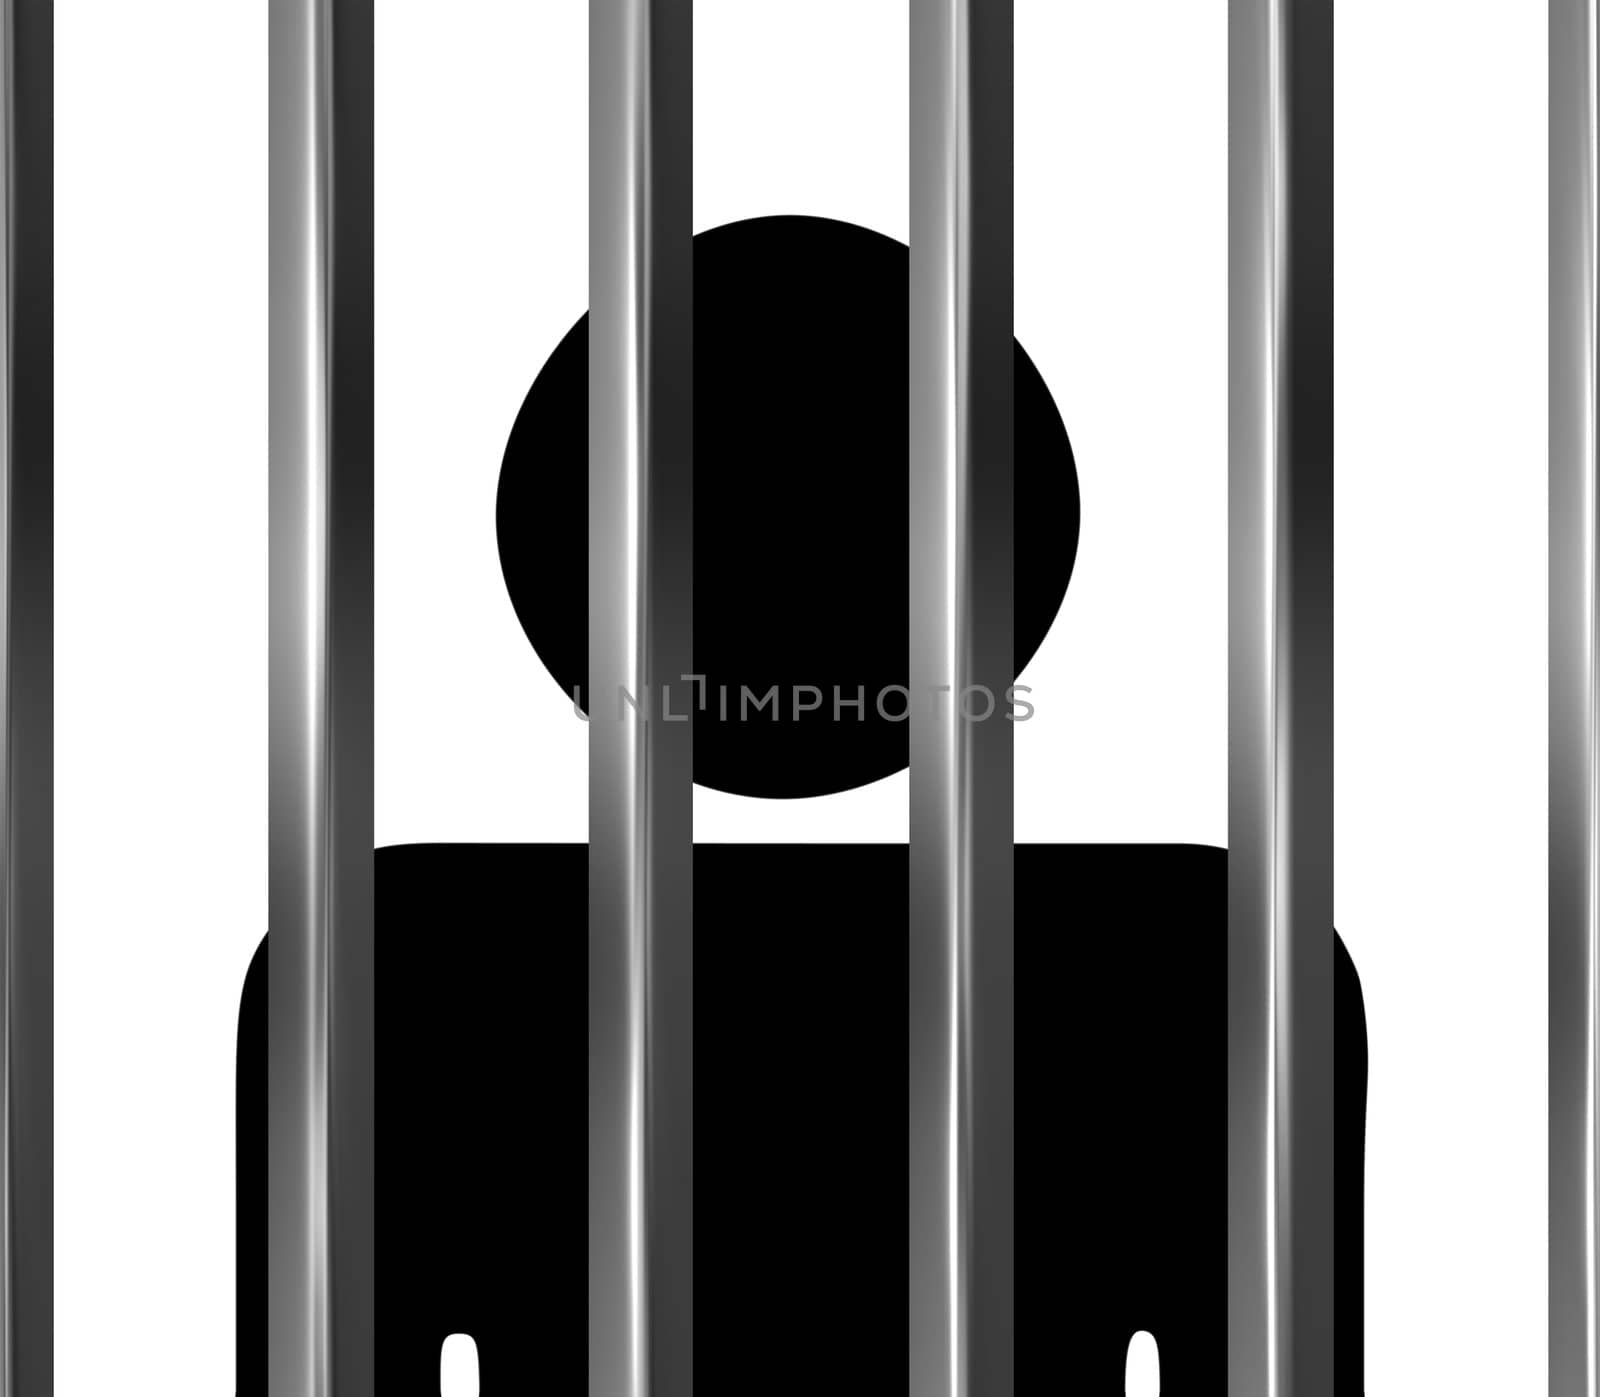 Man behind bars in jail isolated in white